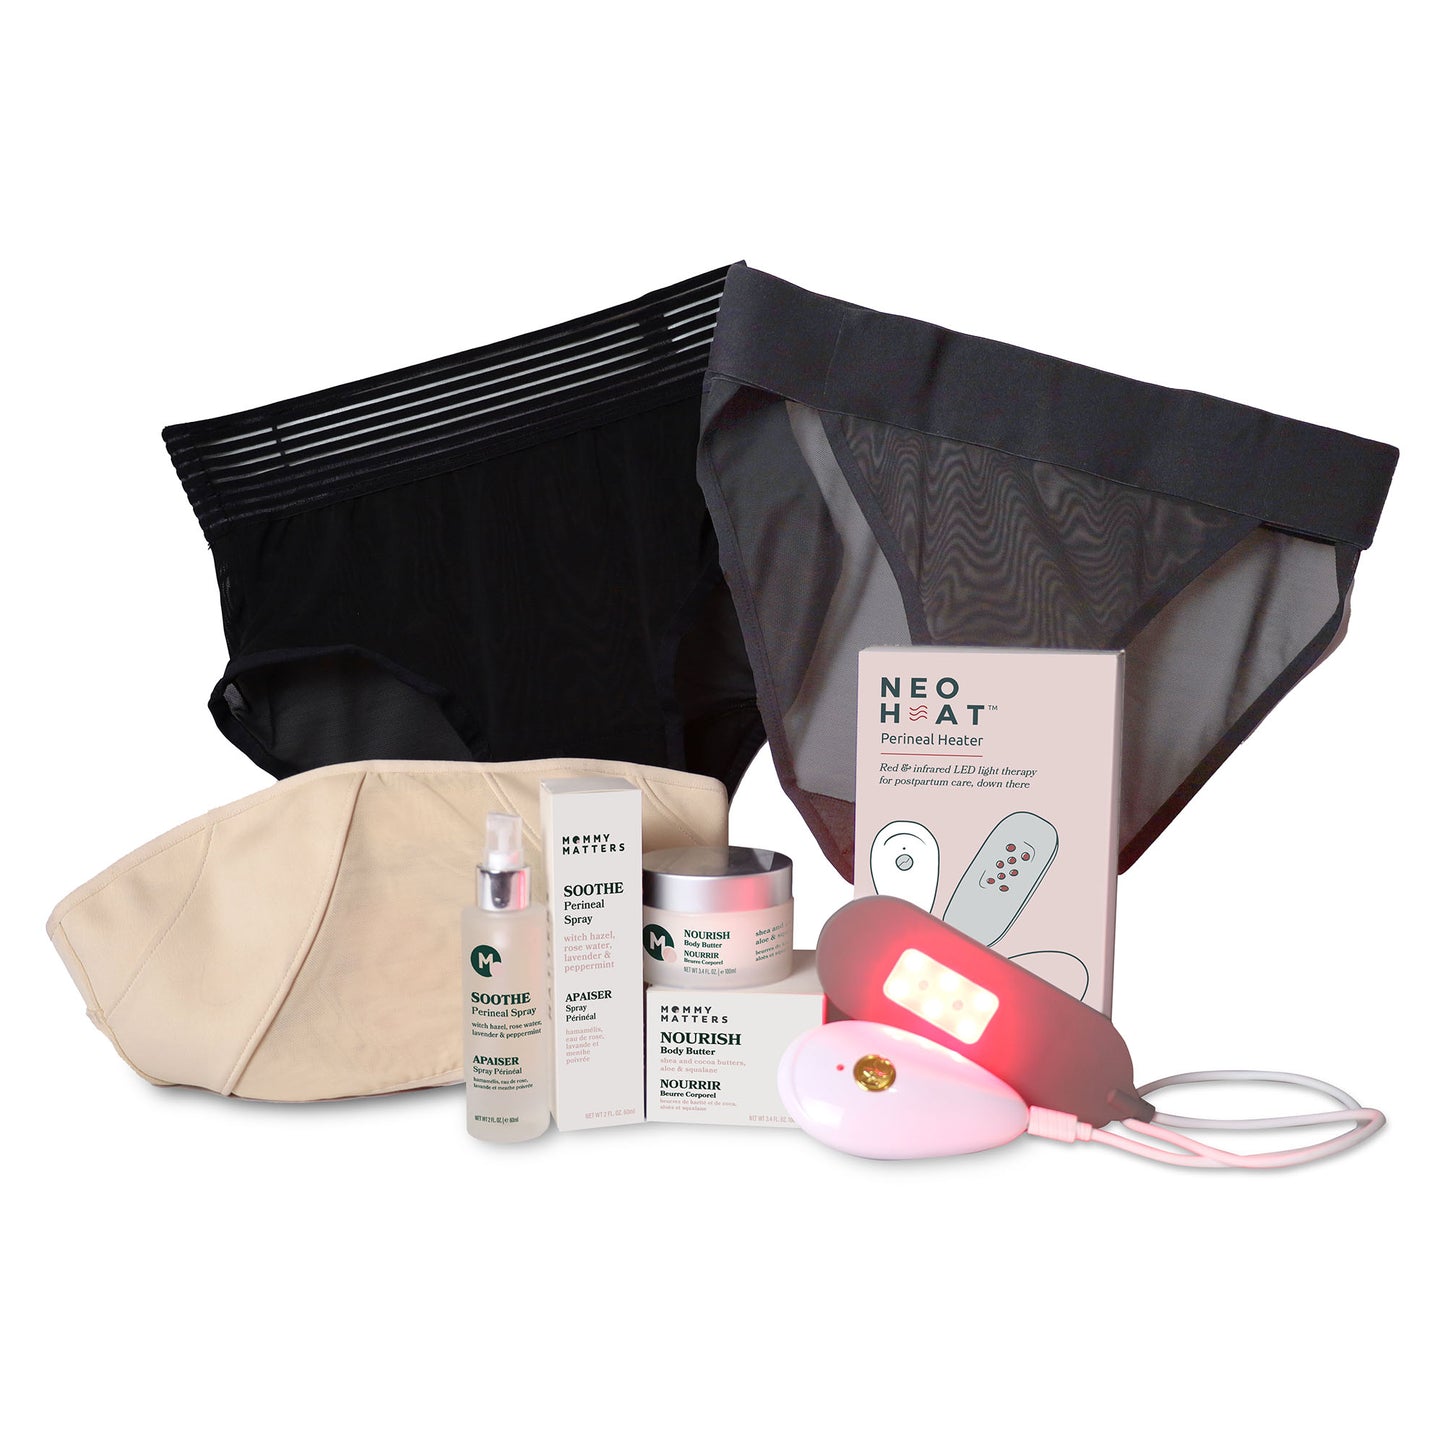  Skin to Skin Postpartum Kit-4 Piece Set in Cosmetic Bag -  Includes: Herbal Bath, Recovery Spray, Restorative Salve, and Nipple Butter  - Postpartum Care Kit - Mommy Hospital Bags for